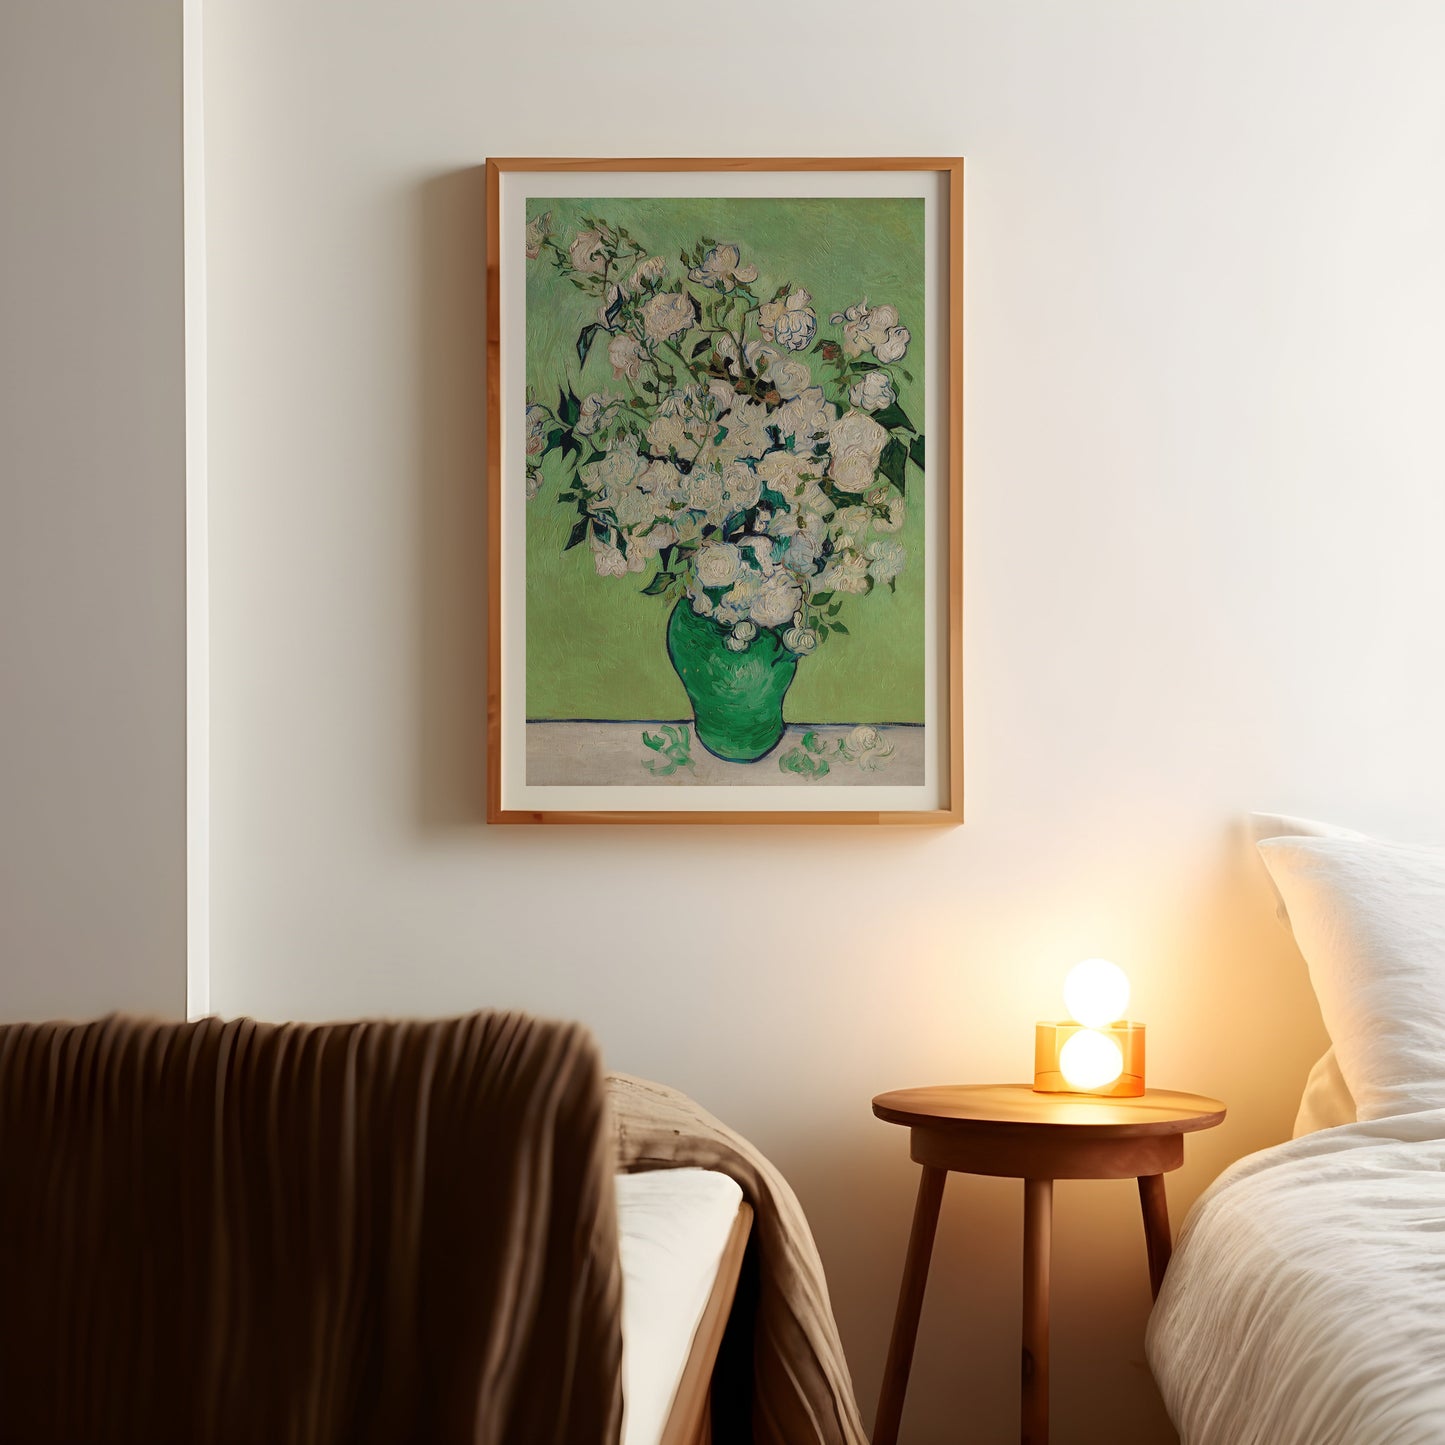 a picture of a vase of flowers on a wall above a bed